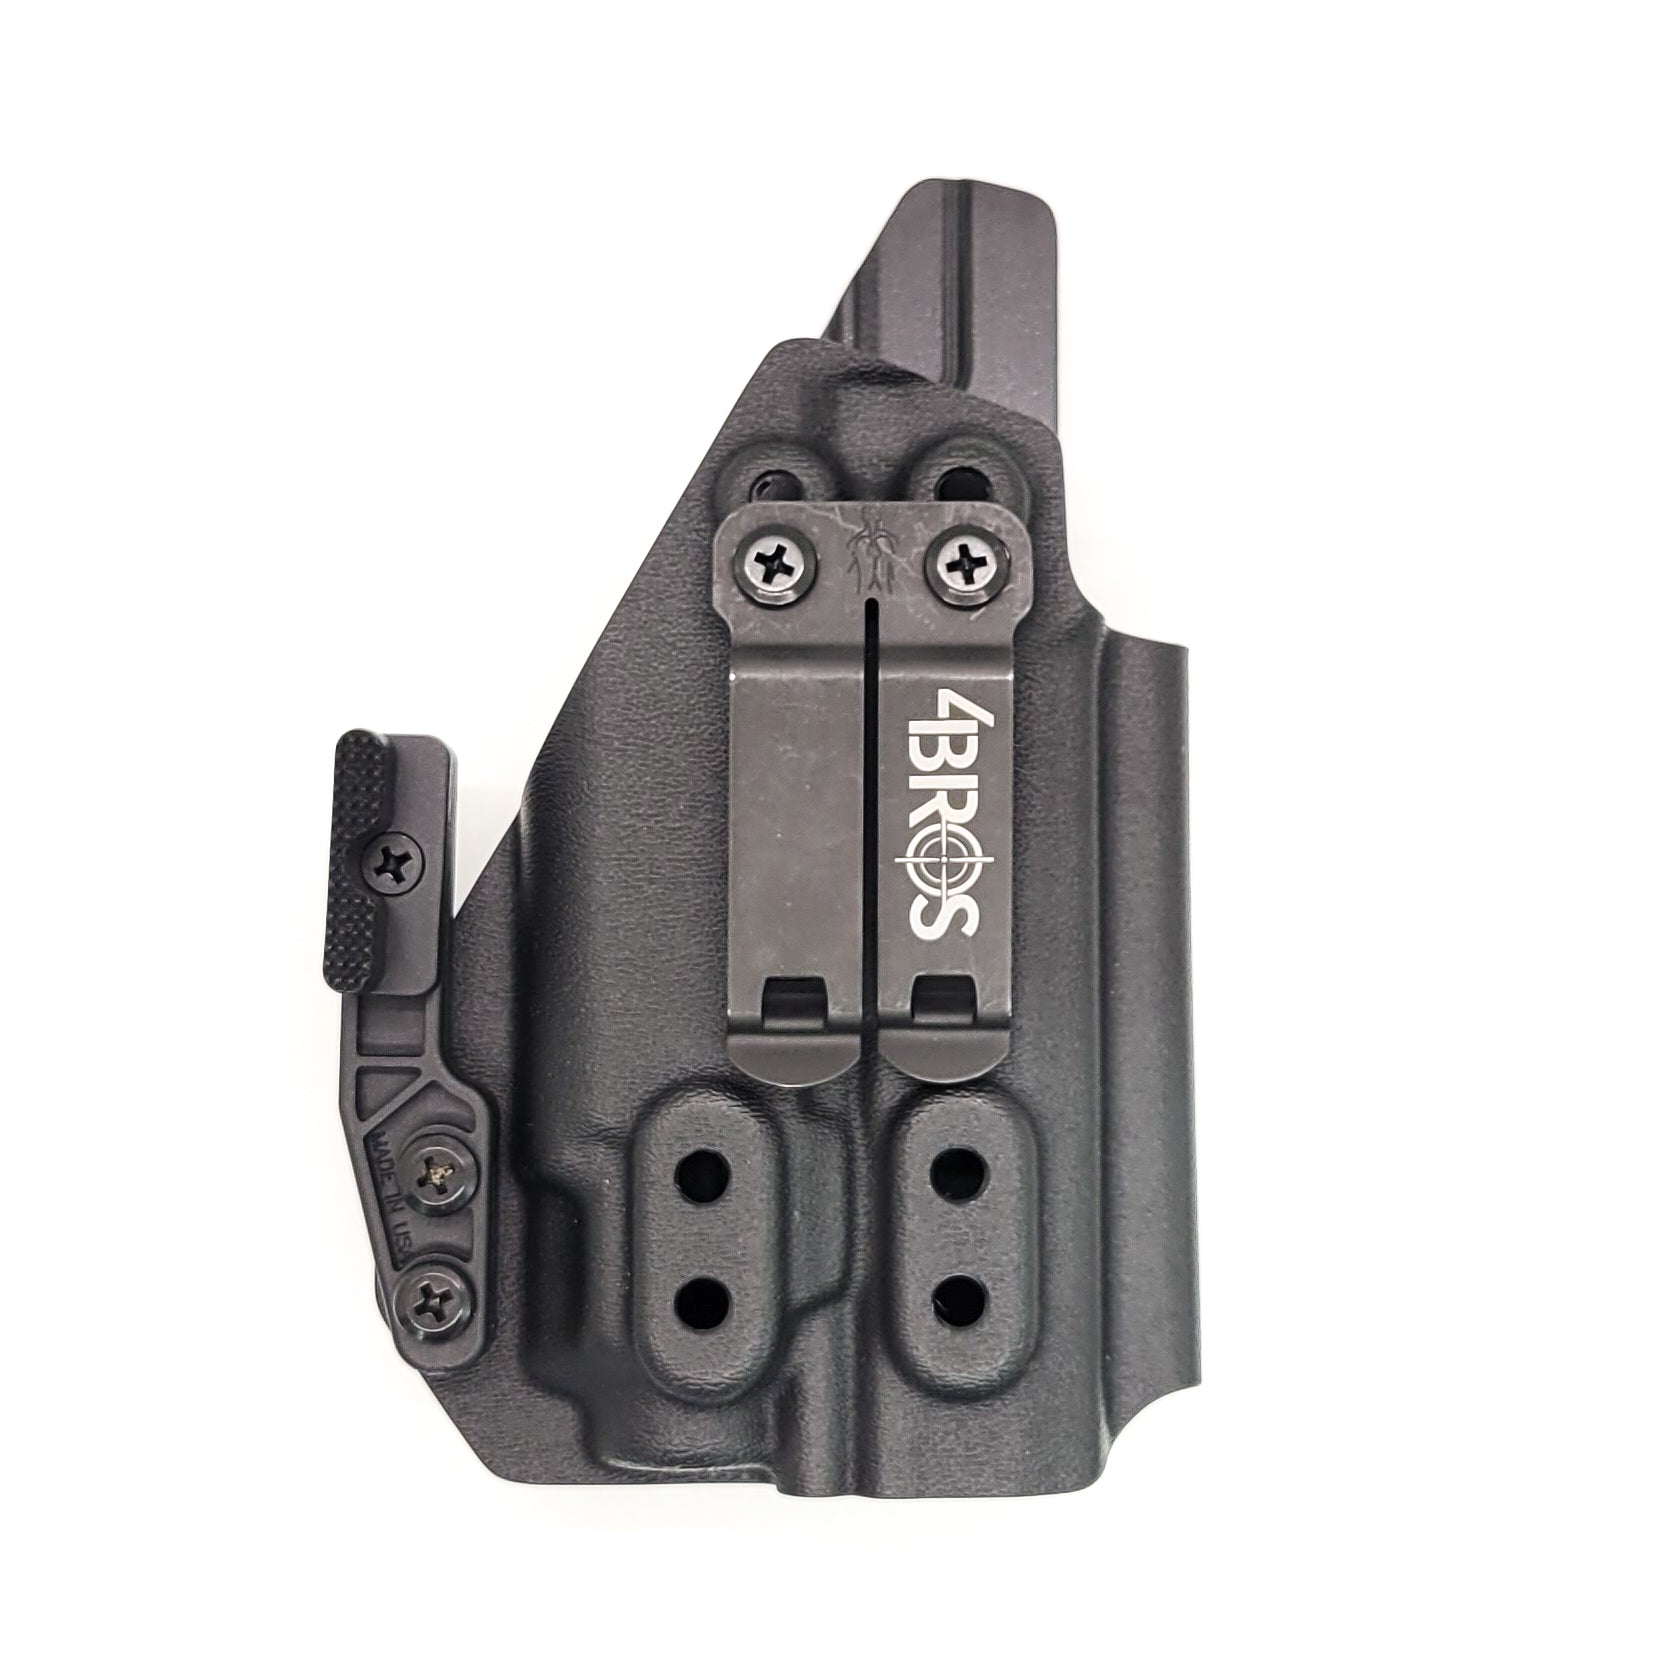 For the best Inside Waistband Kydex Holster designed to fit the Sig Sauer P365-XMACRO TACOPS with Streamlight TLR-8 Sub, shop Four Brothers Holsters.  Full sweat guard, adjustable retention, minimal material & smooth edges to reduce printing. Made in the USA. Open muzzle for threaded barrels, cleared for red dot. MACRO